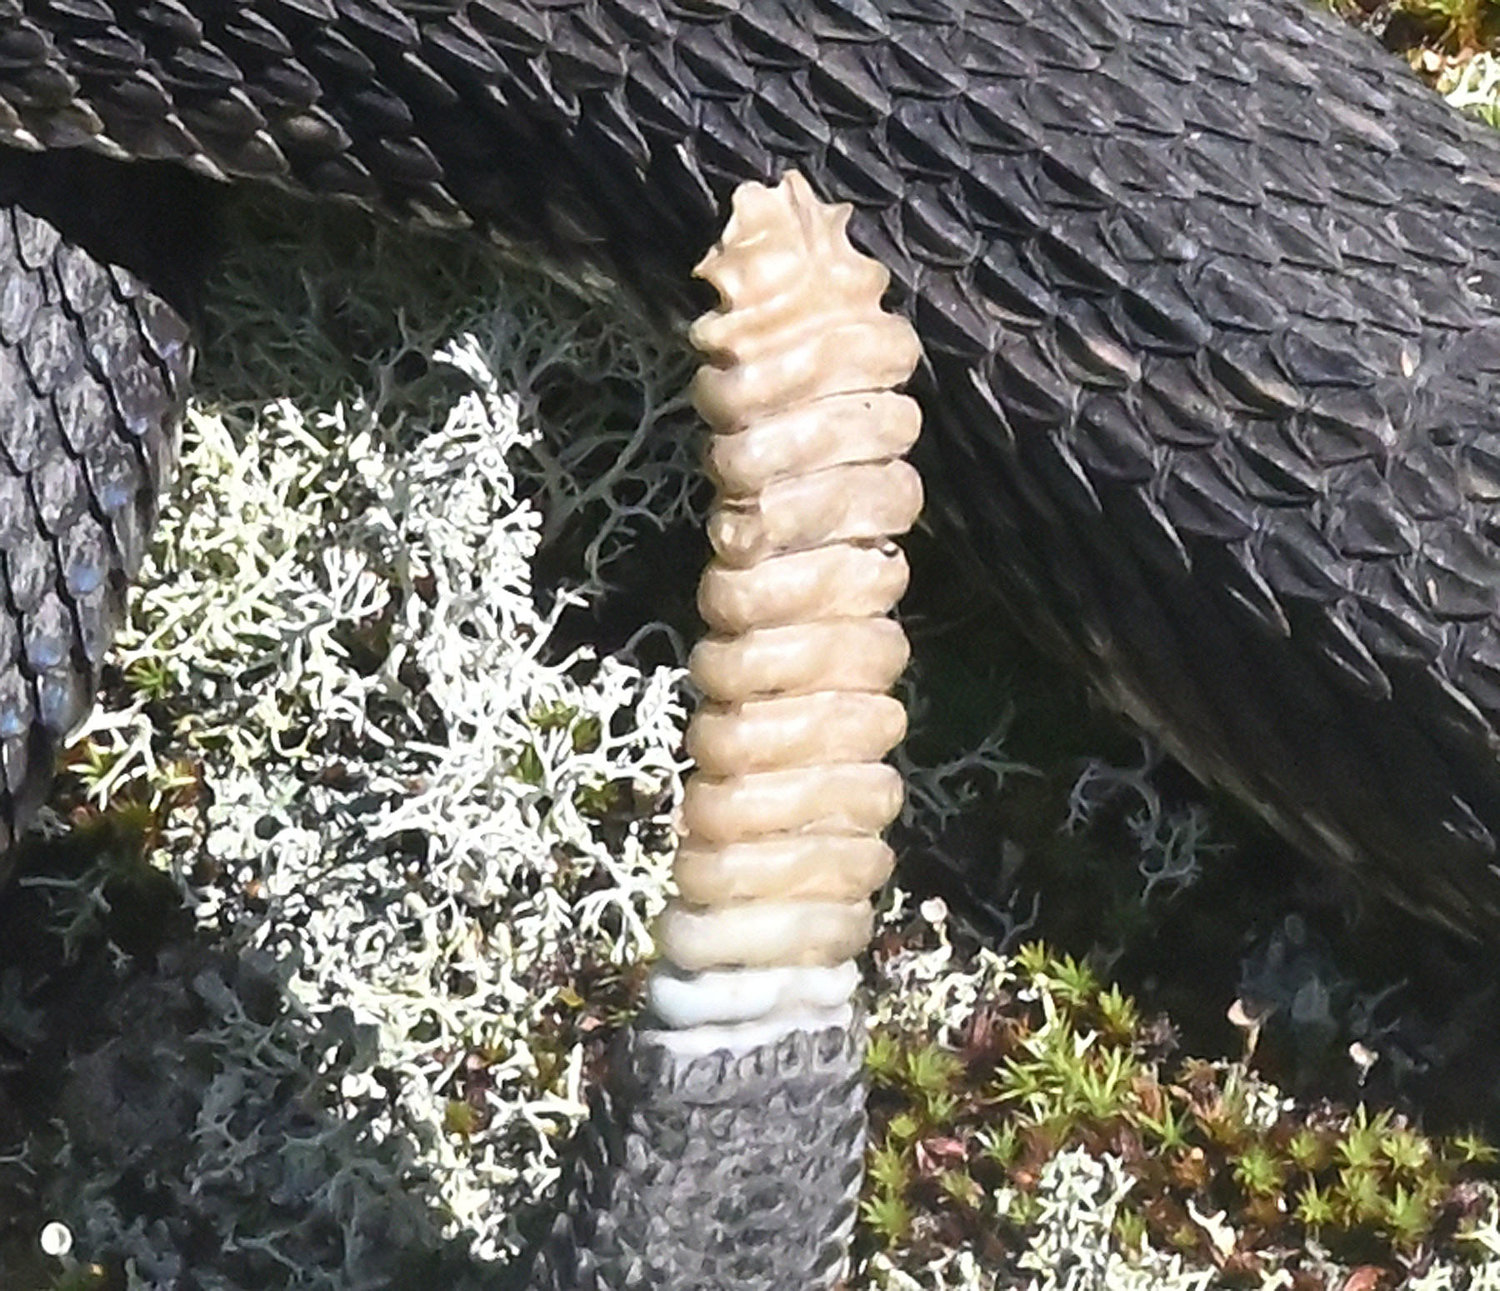 Here is a close-up of the rattle segments of the rattlesnake. Each segment is a separate piece of keratin that is held together by a tongue and groove arrangement. The top segment shows what the “tongue” part of a rattle segment looks like. Several segments are missing from the top section shown here; if all were intact, the segments would taper down to a point where a small “birth button” would appear. A young (neonate) rattlesnake sheds soon after birth.